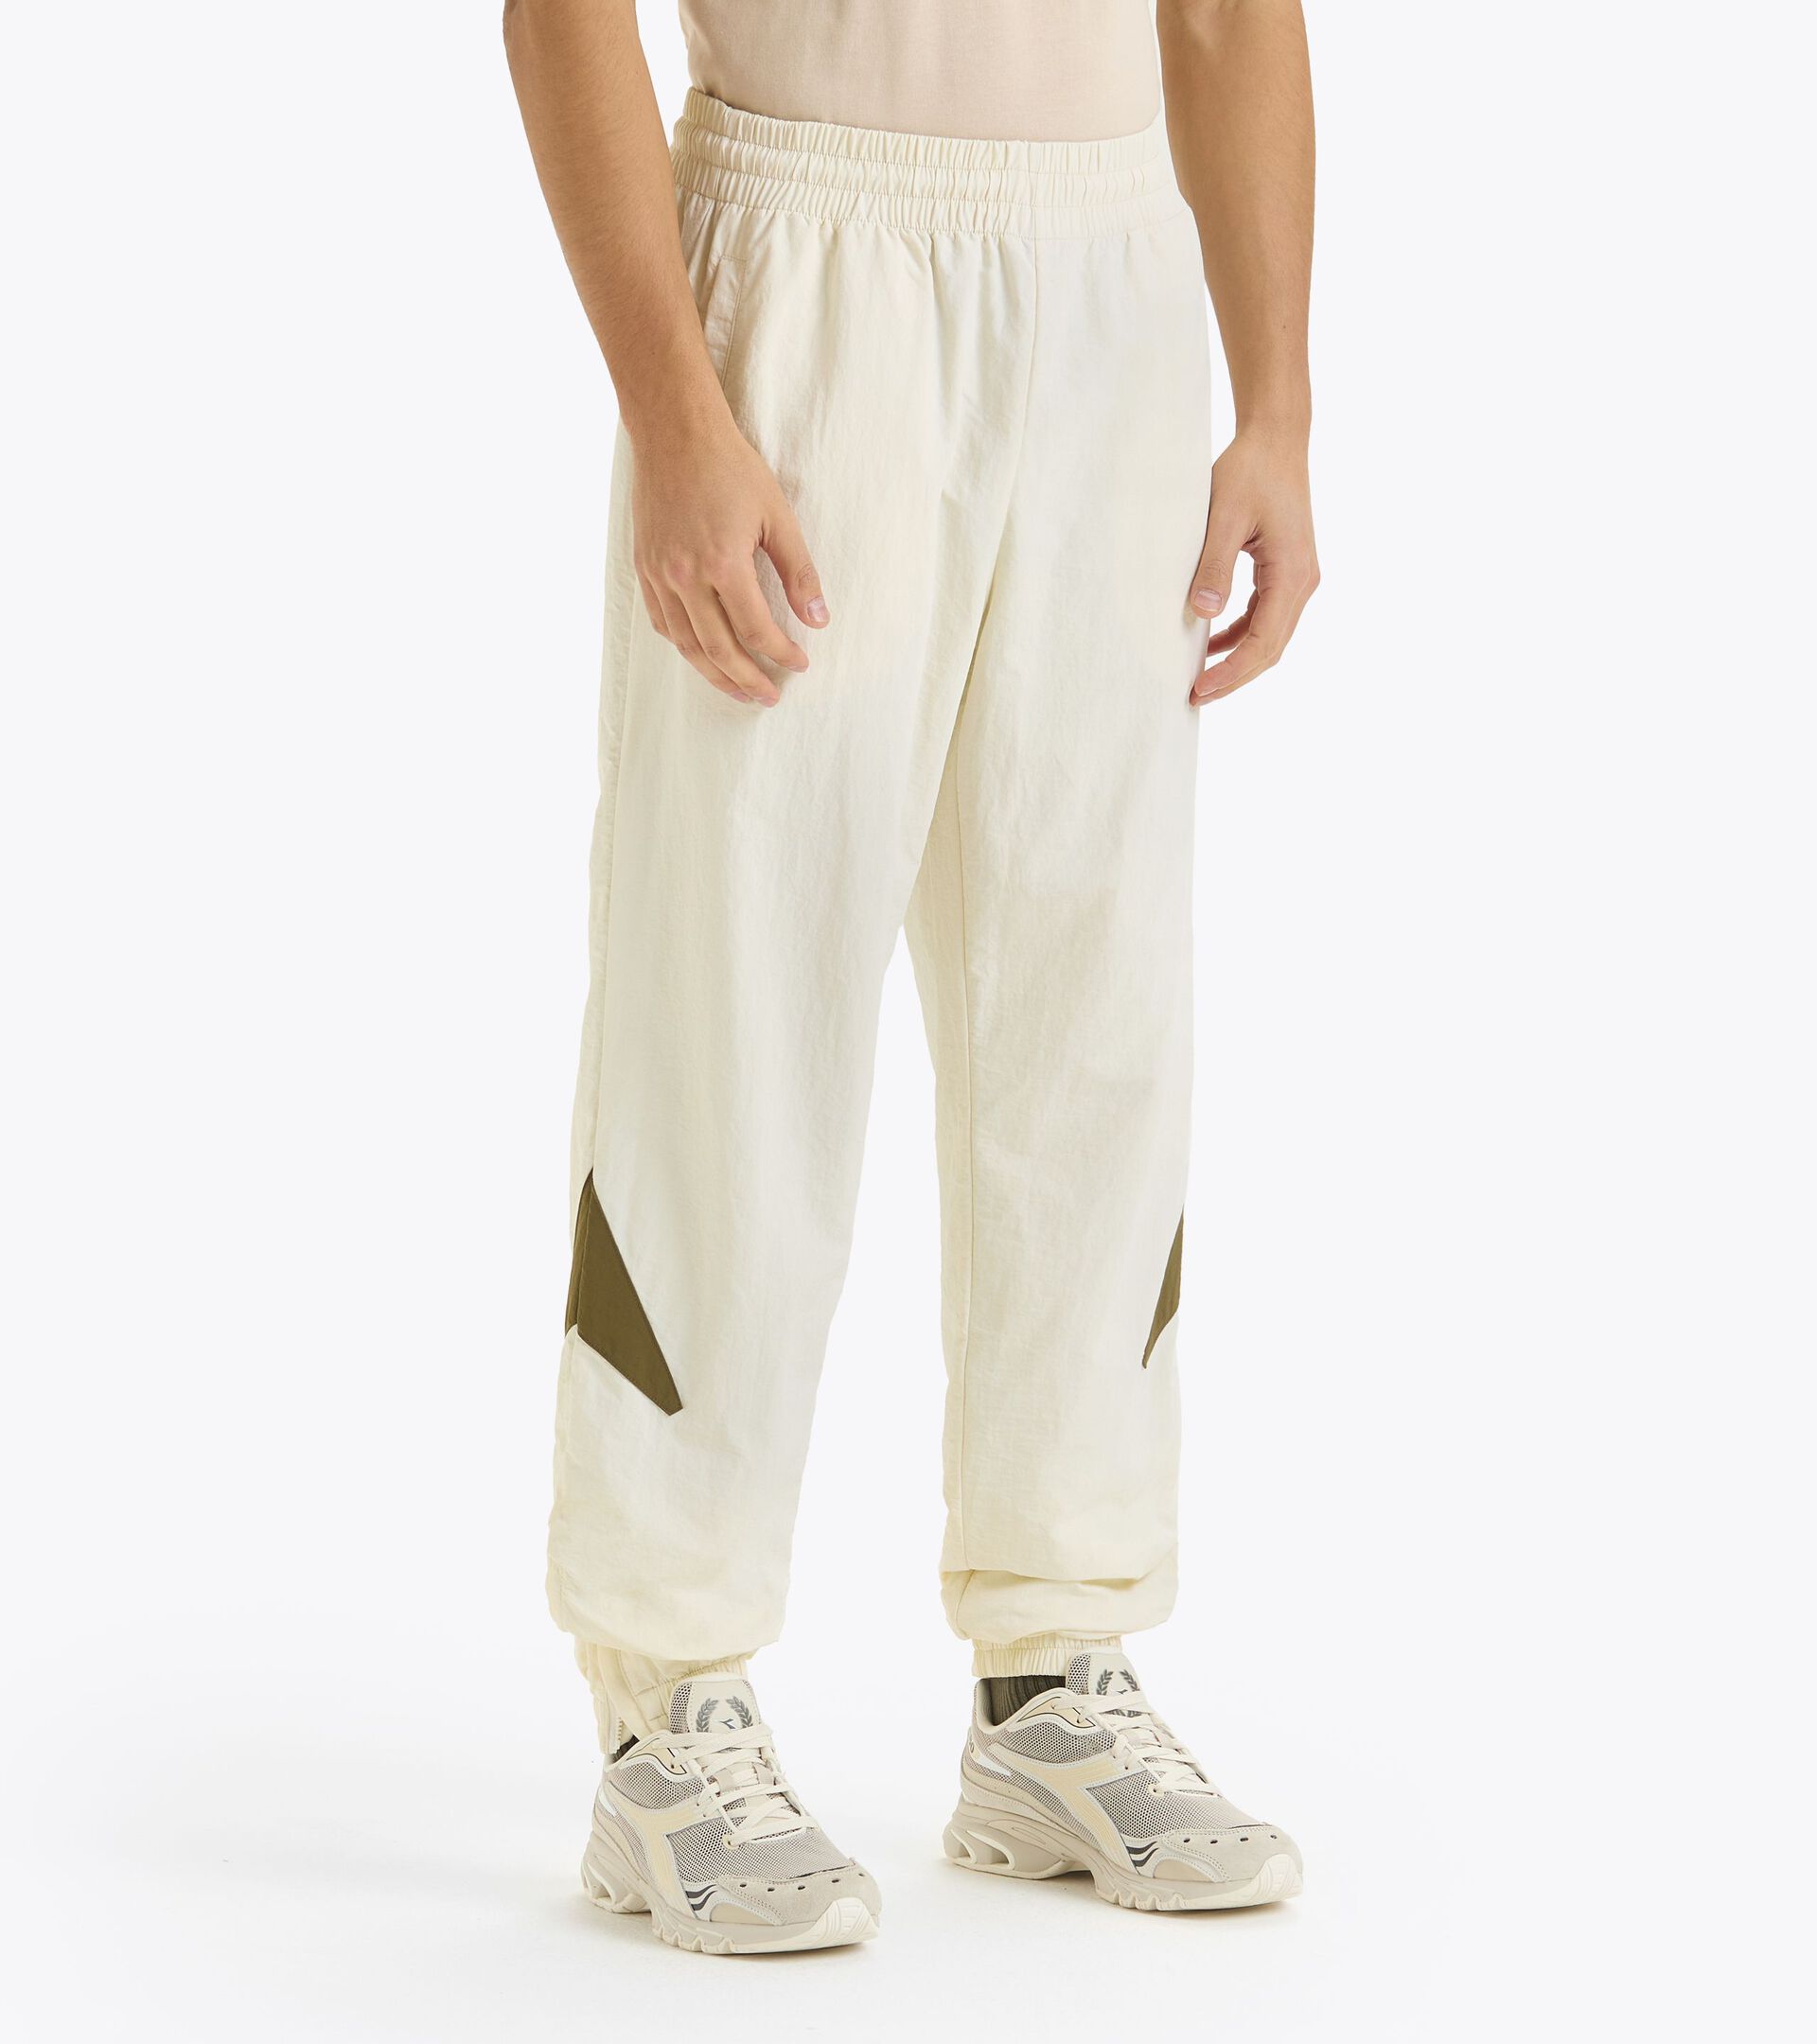 Track pants - Made in italy - Gender Neutral
 TRACK PANTS LEGACY WHISPER WHITE - Diadora